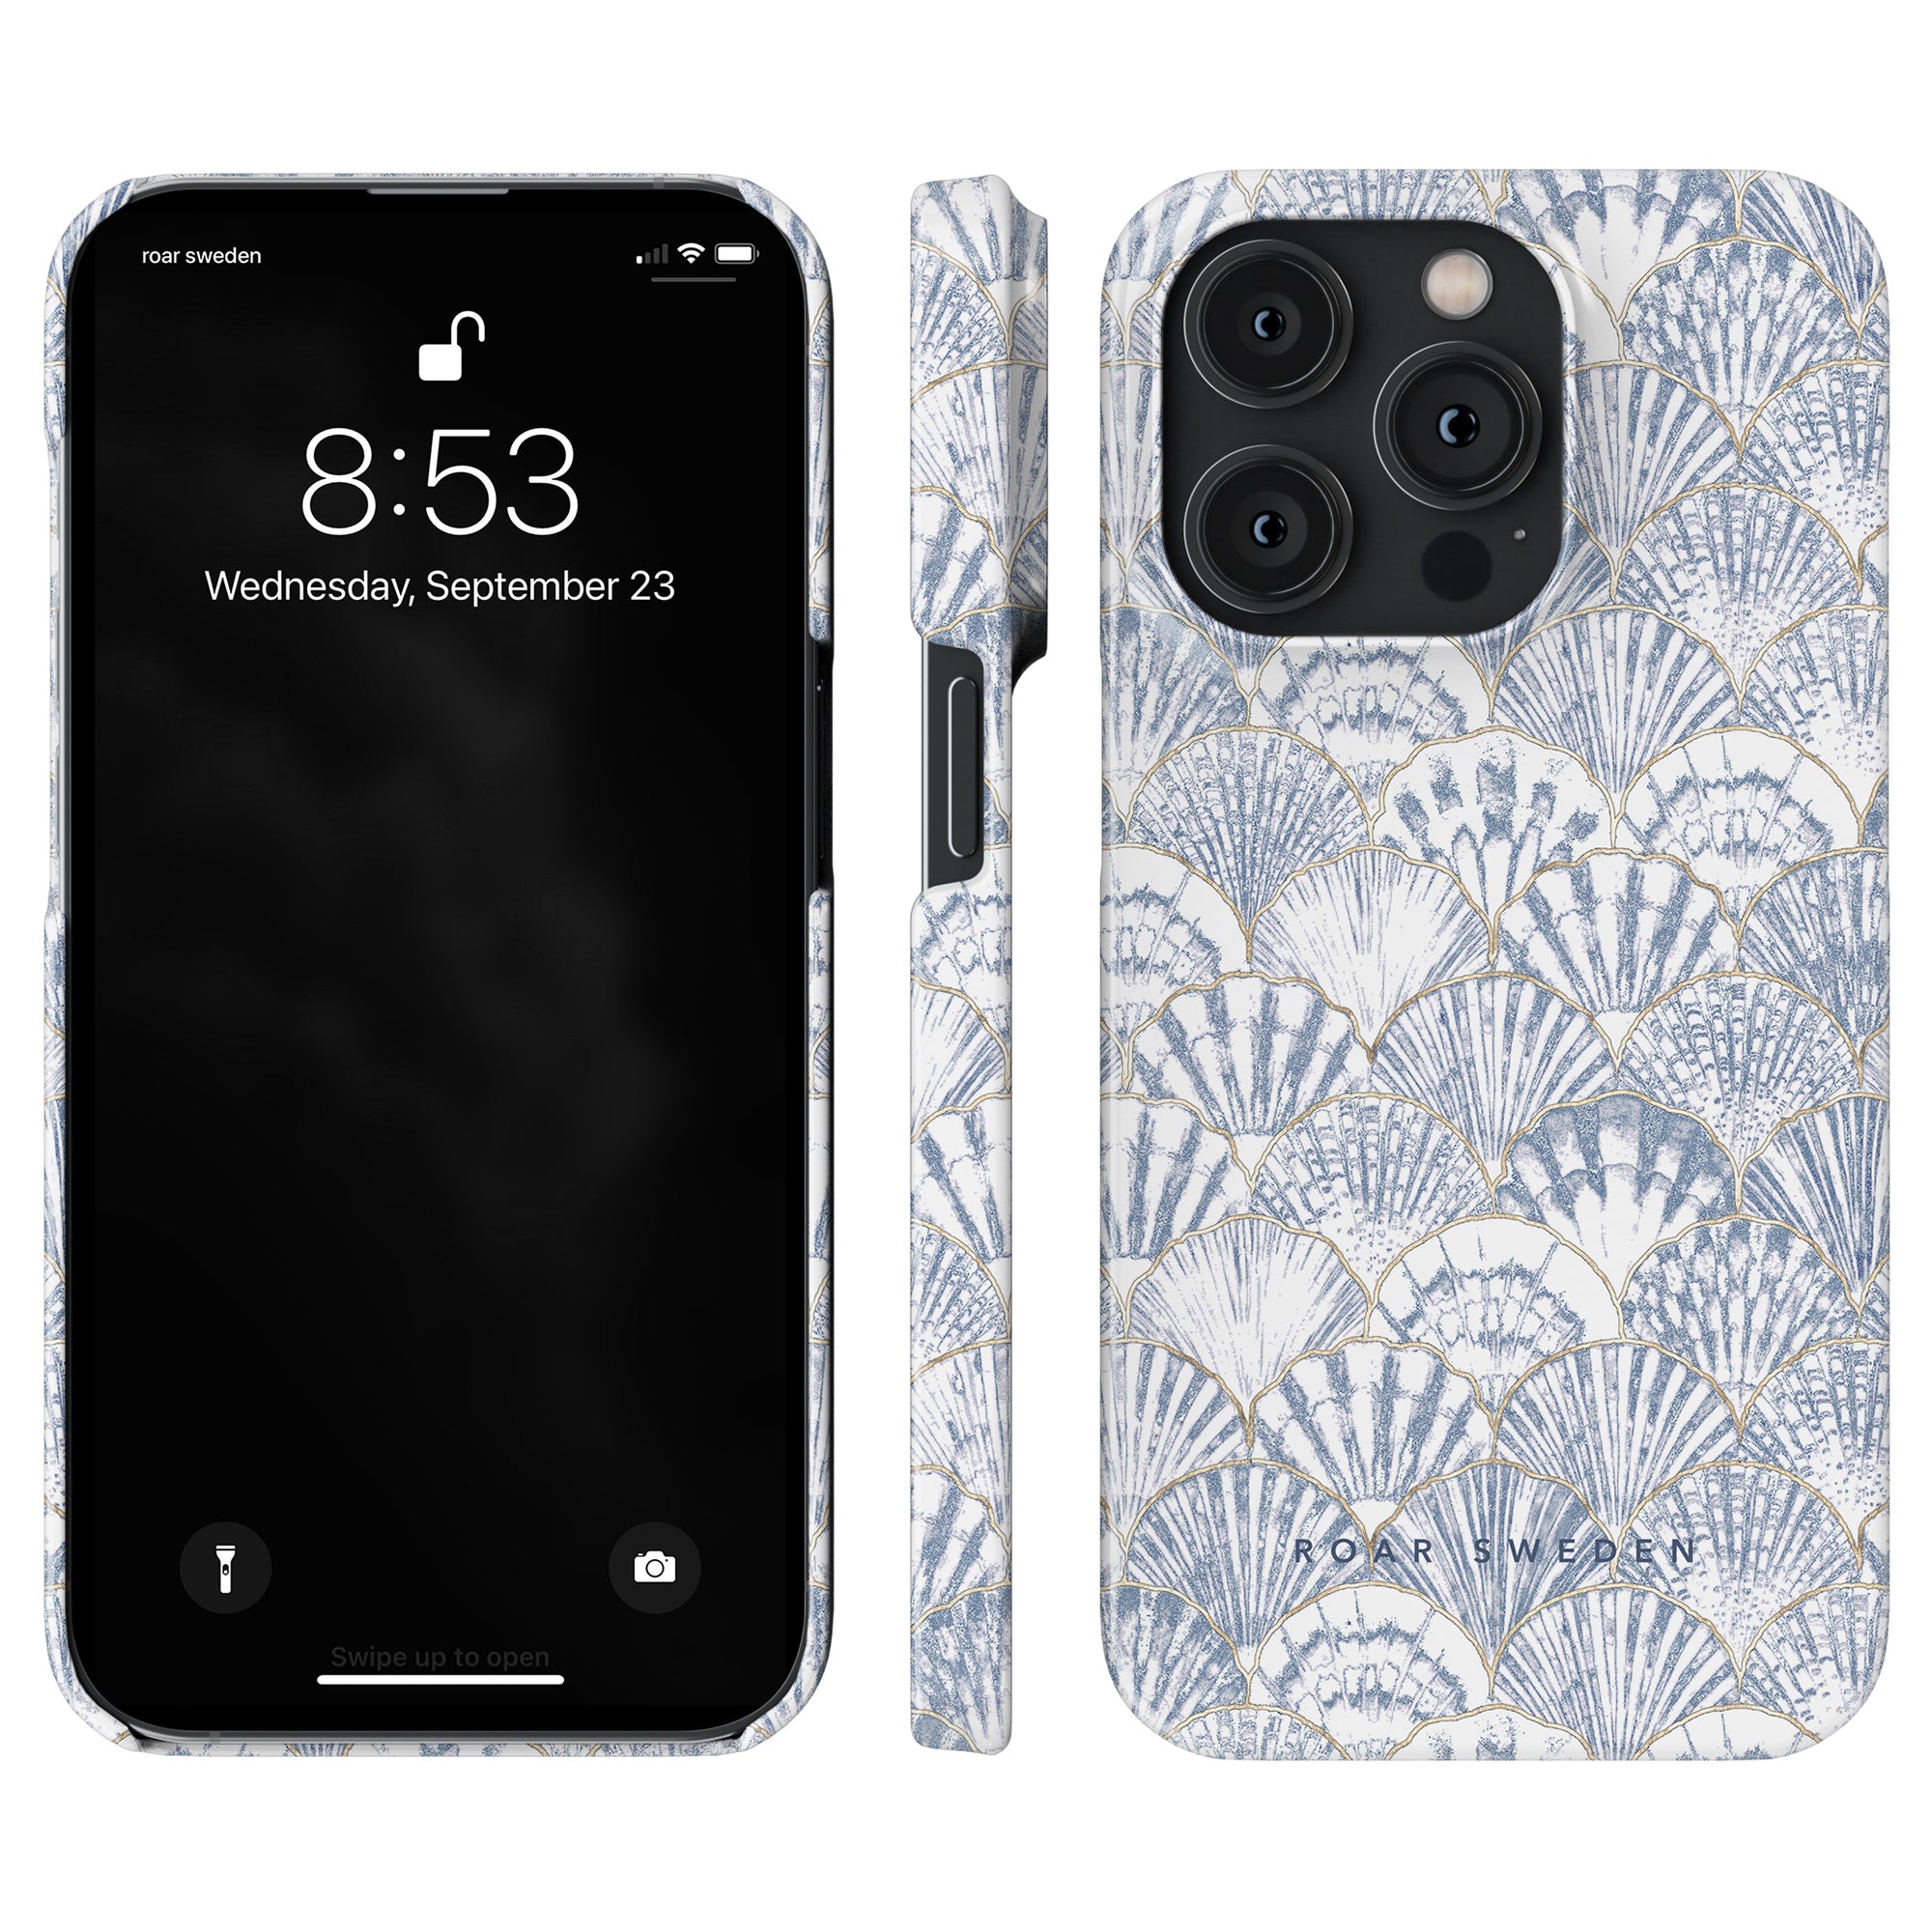 Front and side view of a smartphone with an ocean collection, floral-patterned Valencia Slim case.